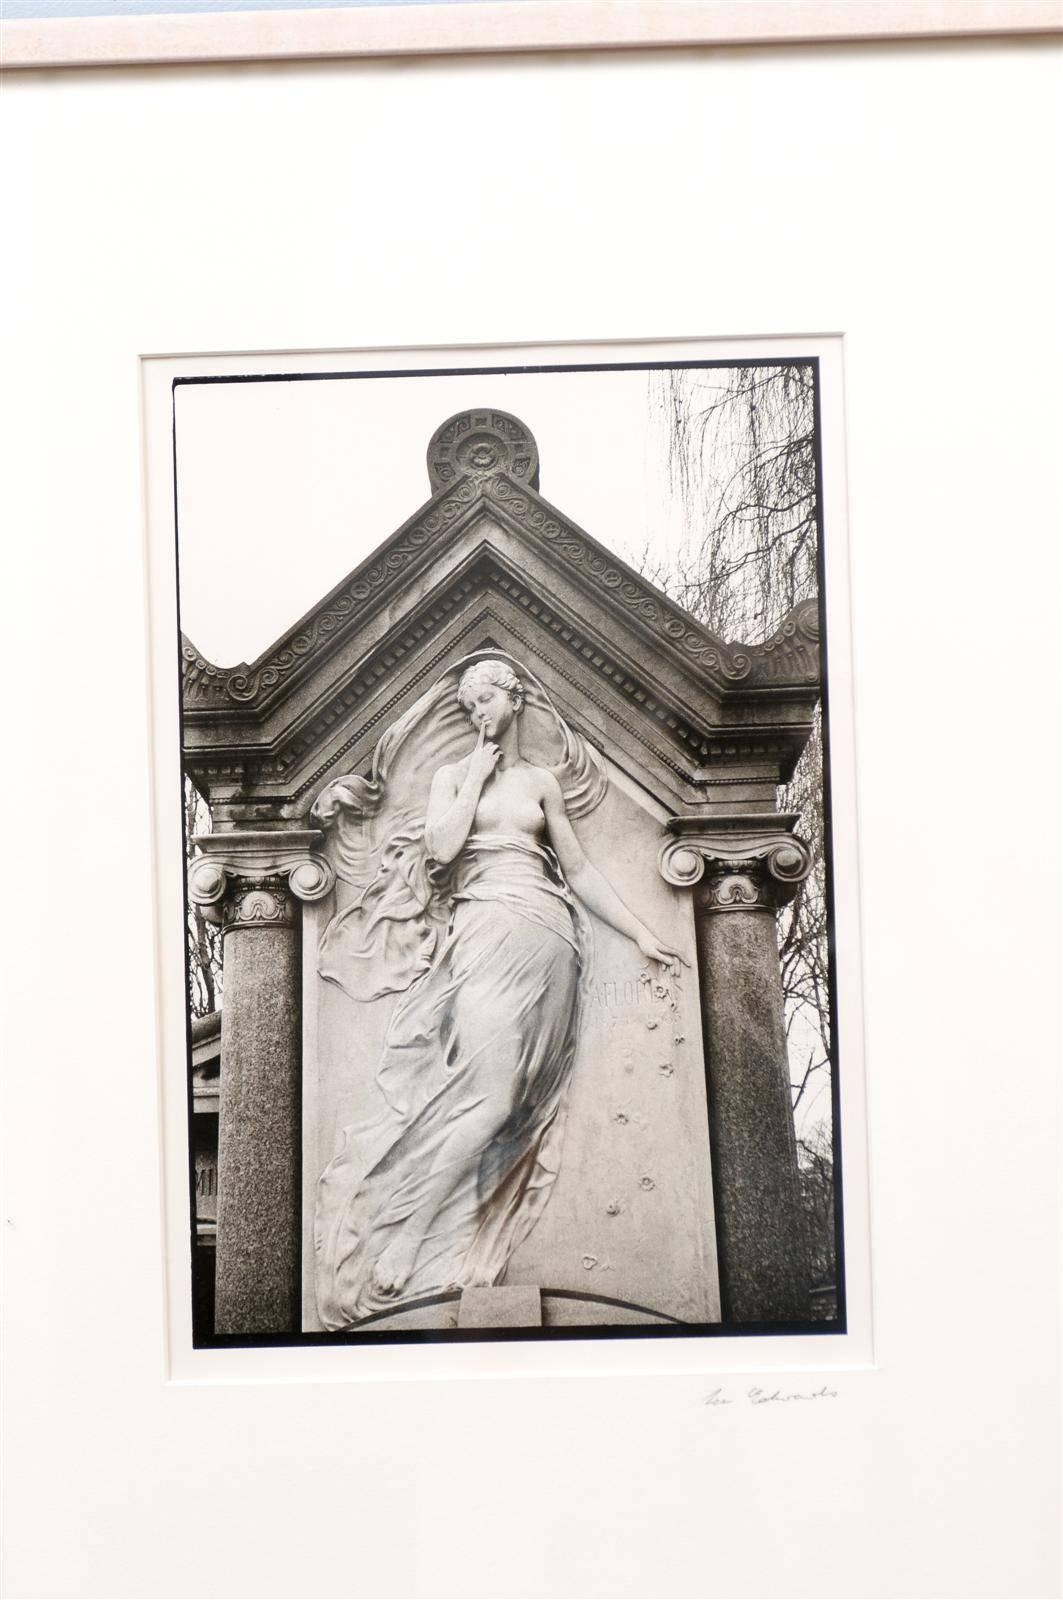 Cemetery Photograph by Lee Edwards 'Series of 4' For Sale 2